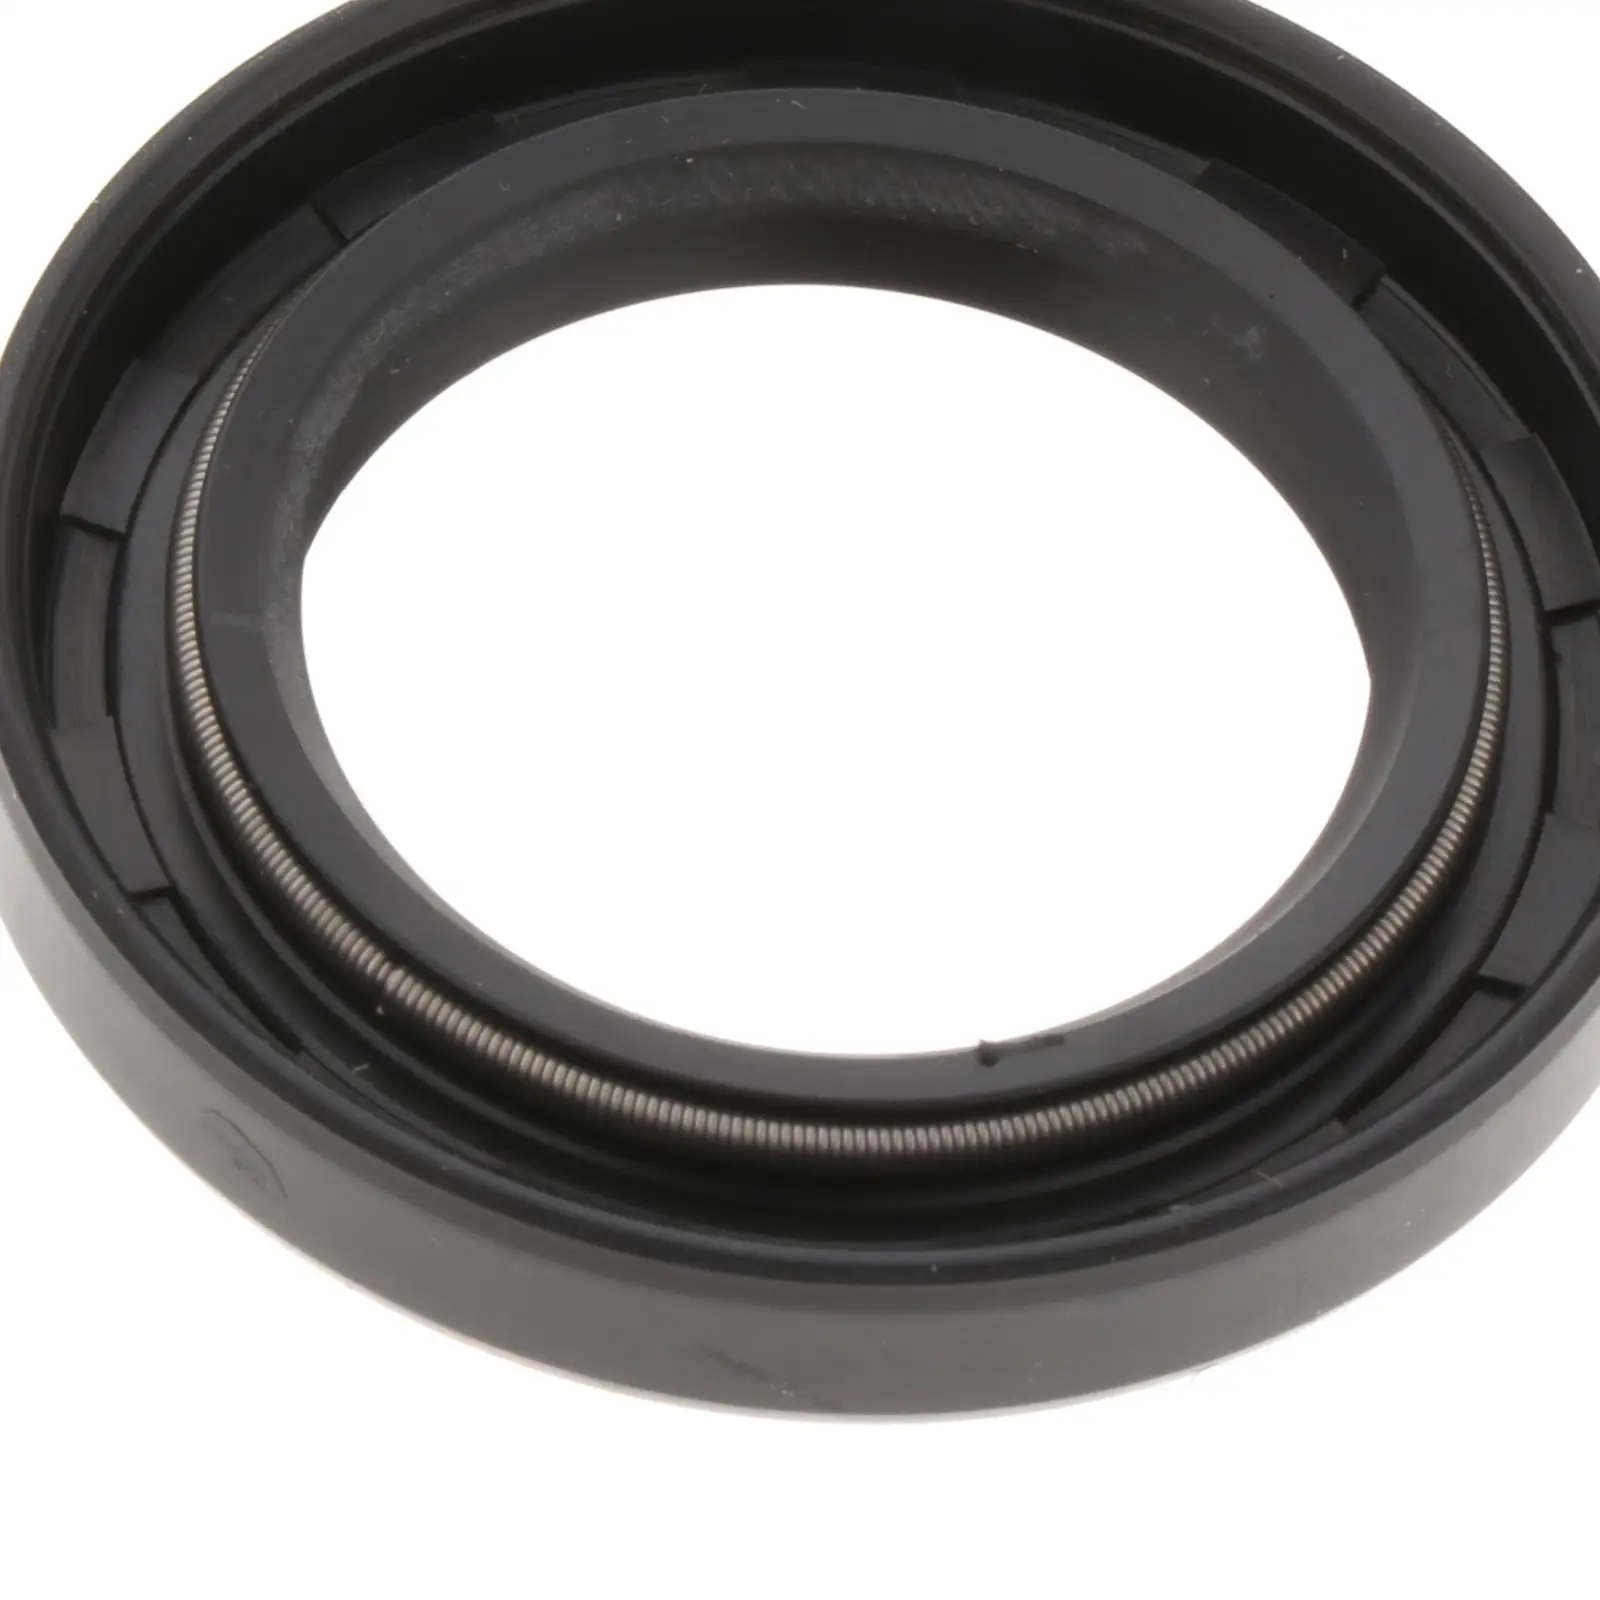 Oil Seal Fit for Yamaha Outboard Motor 2T 60HP-90HP Premium Direct Replaces